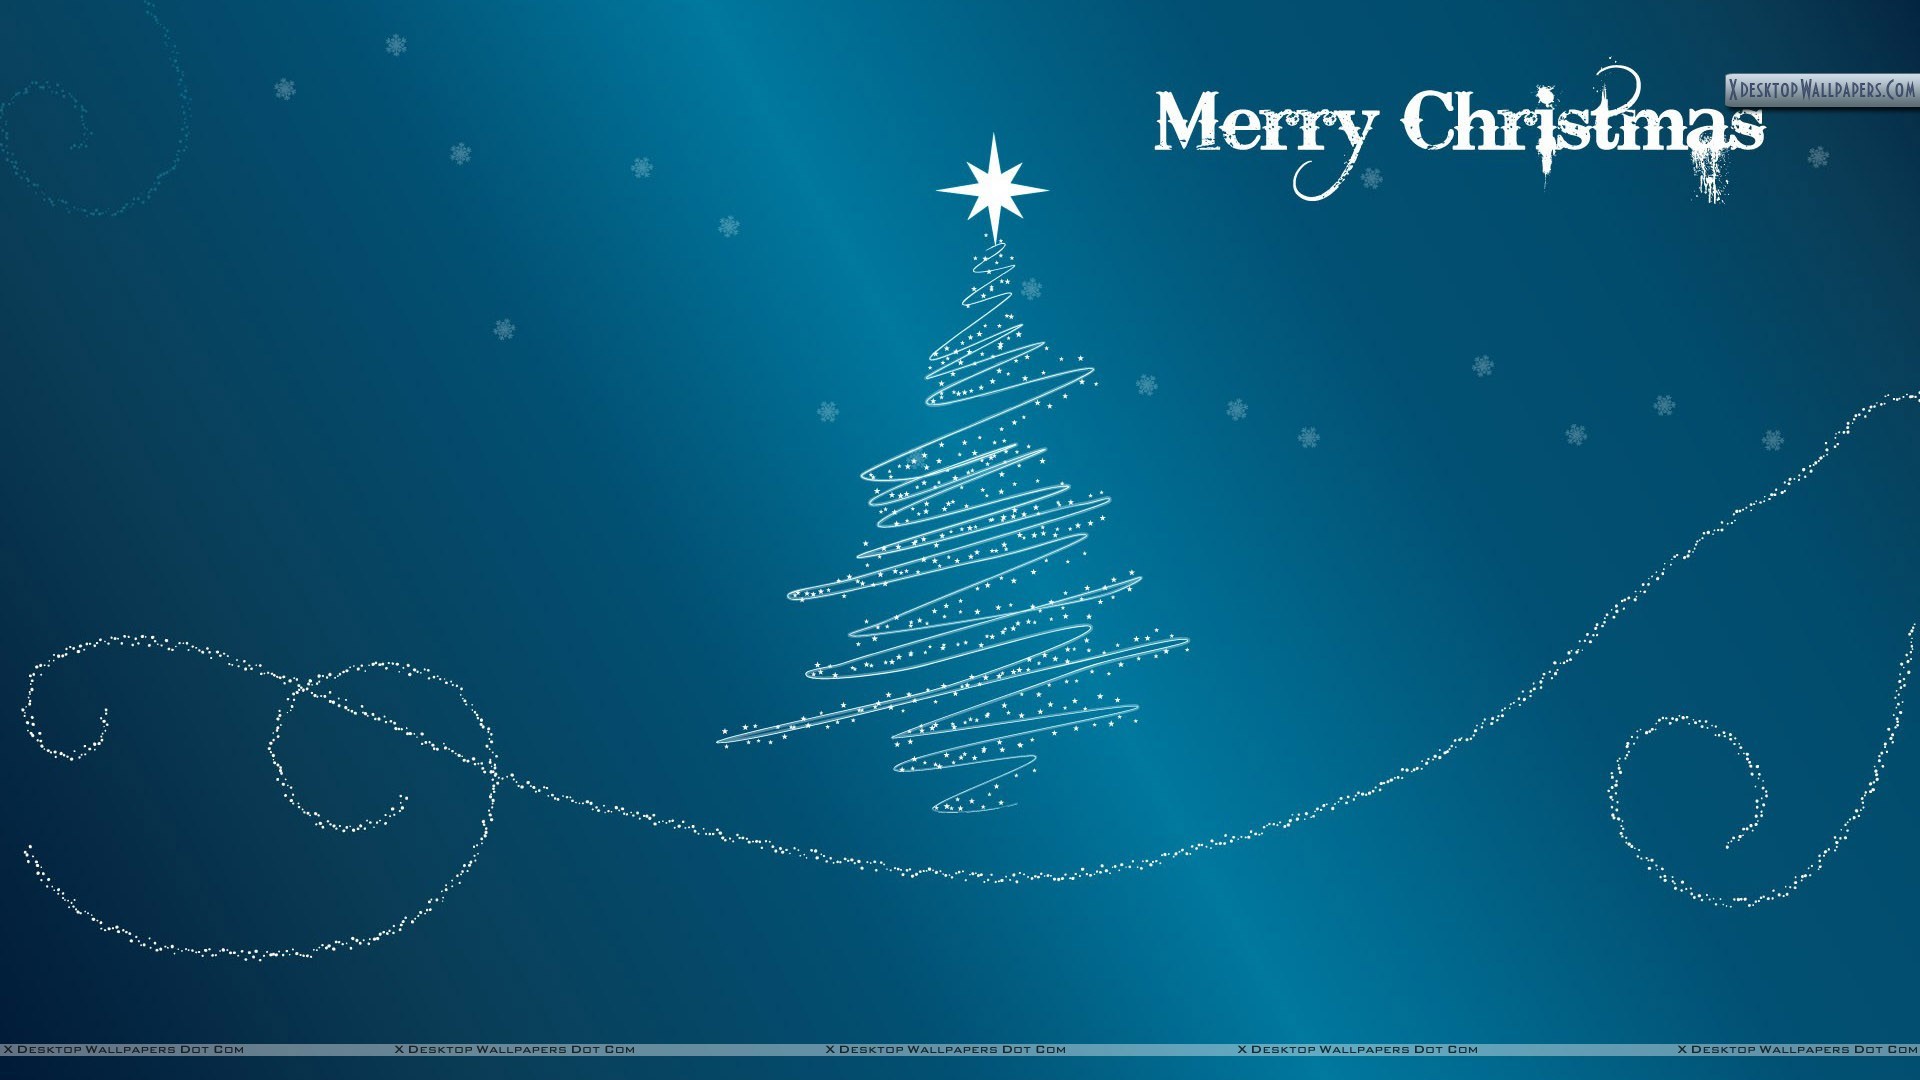 1920x1080 You are viewing wallpaper titled "Merry Christmas ...